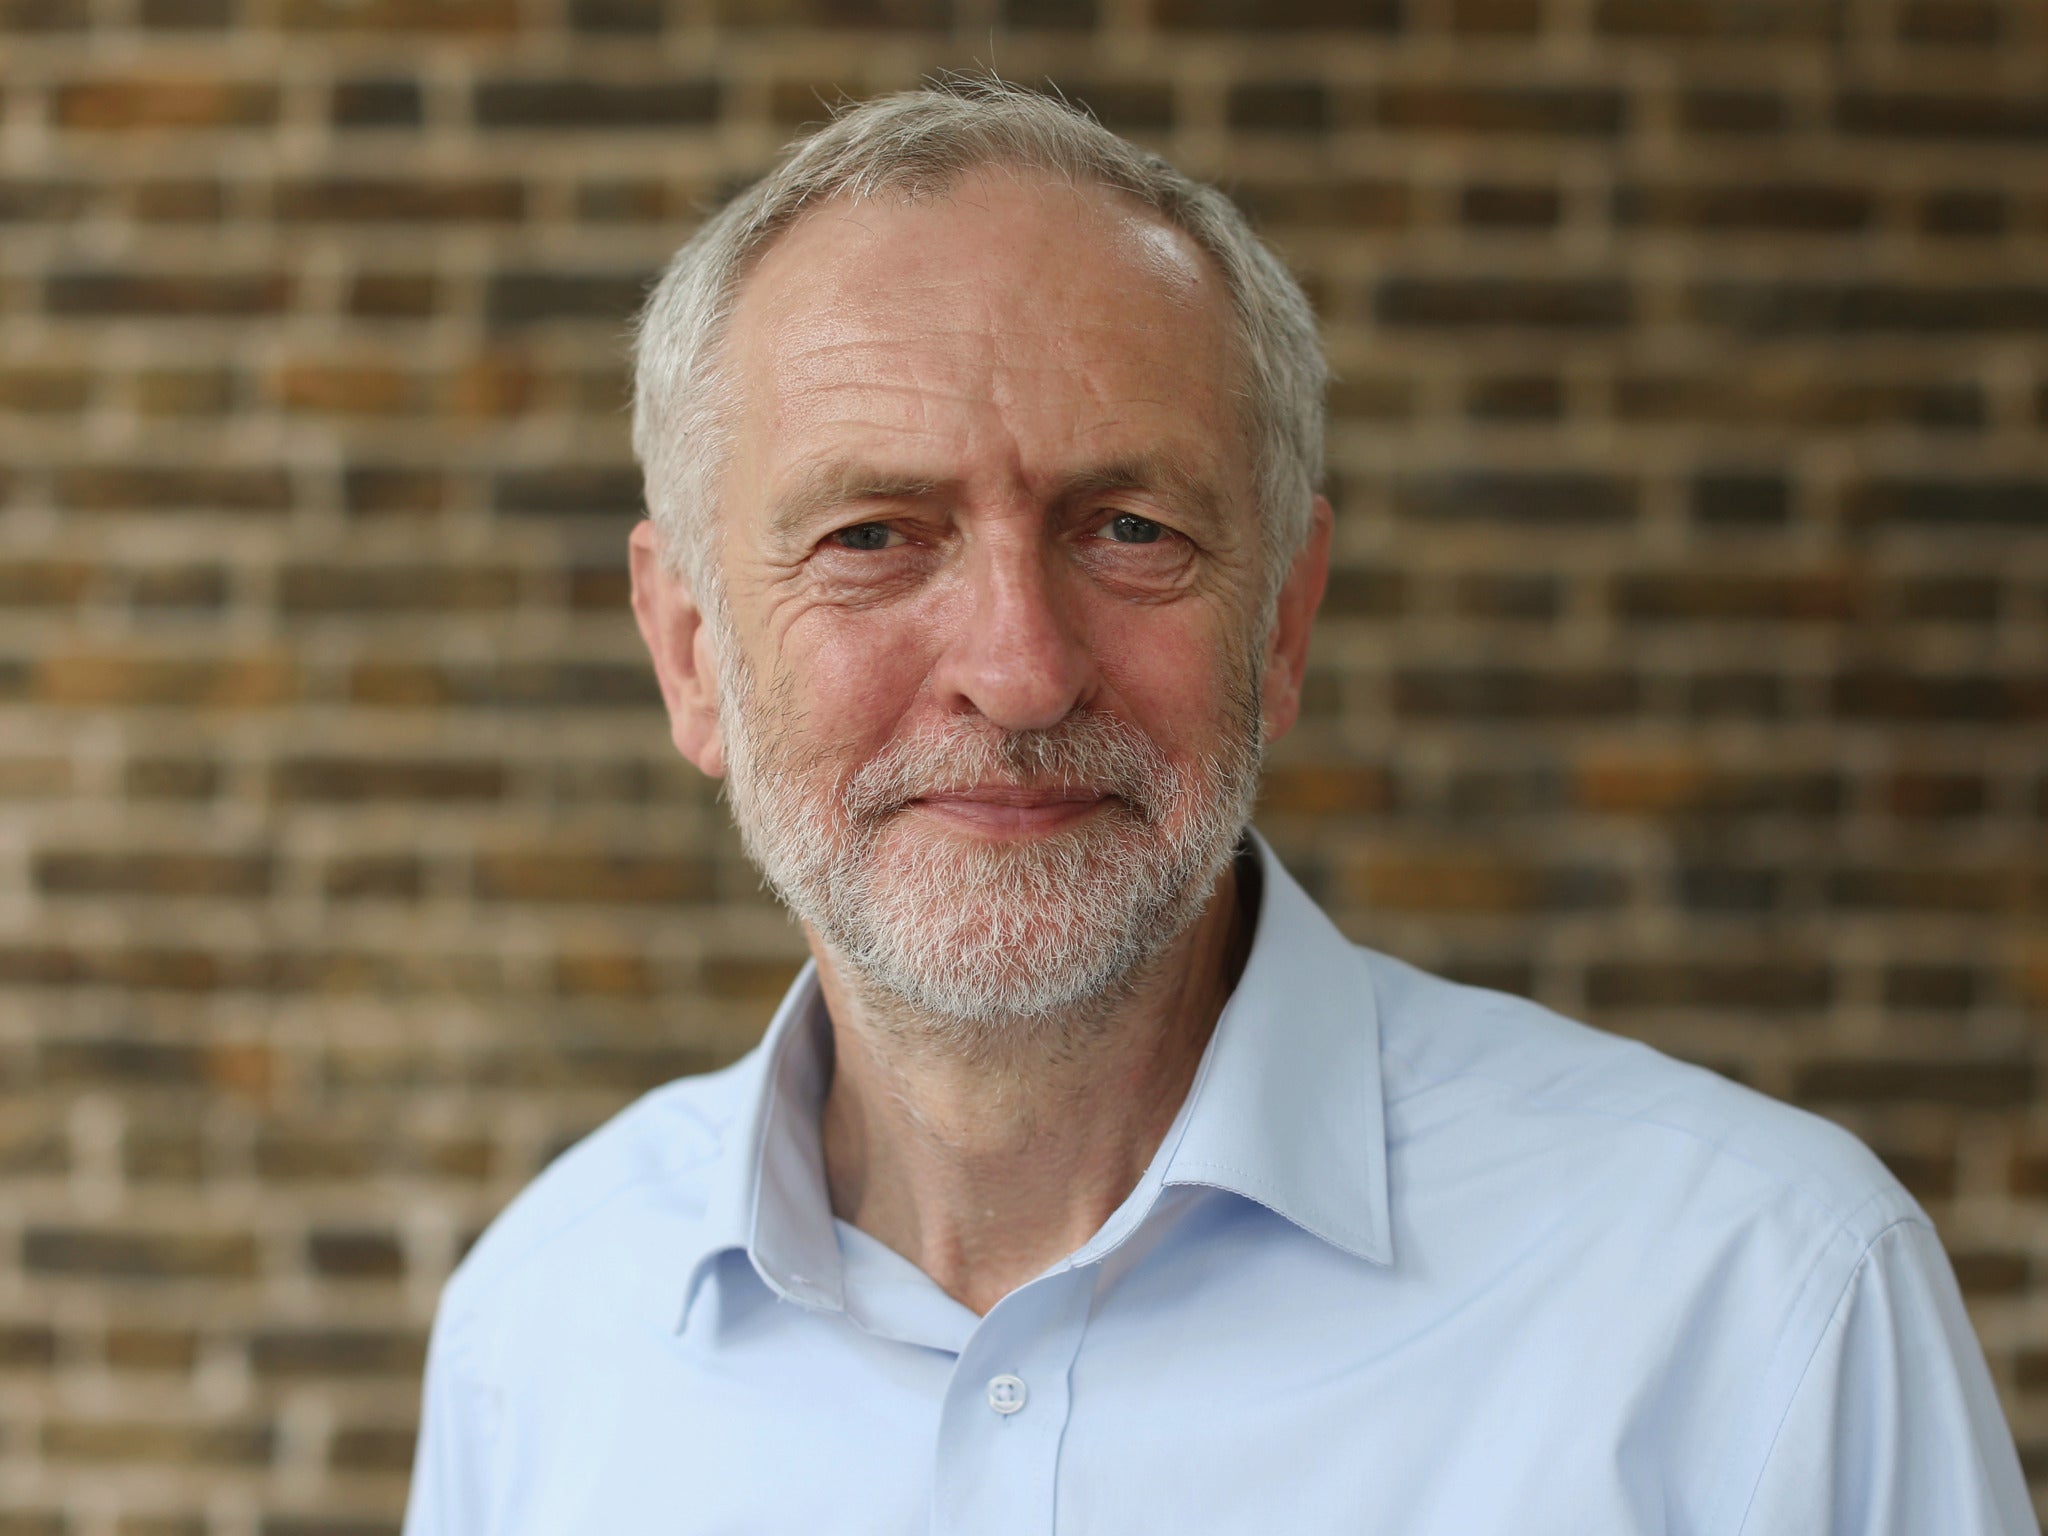 Militant have said it would essentially be the formation of a new political party if Jeremy Corbyn won the Labour leadership race